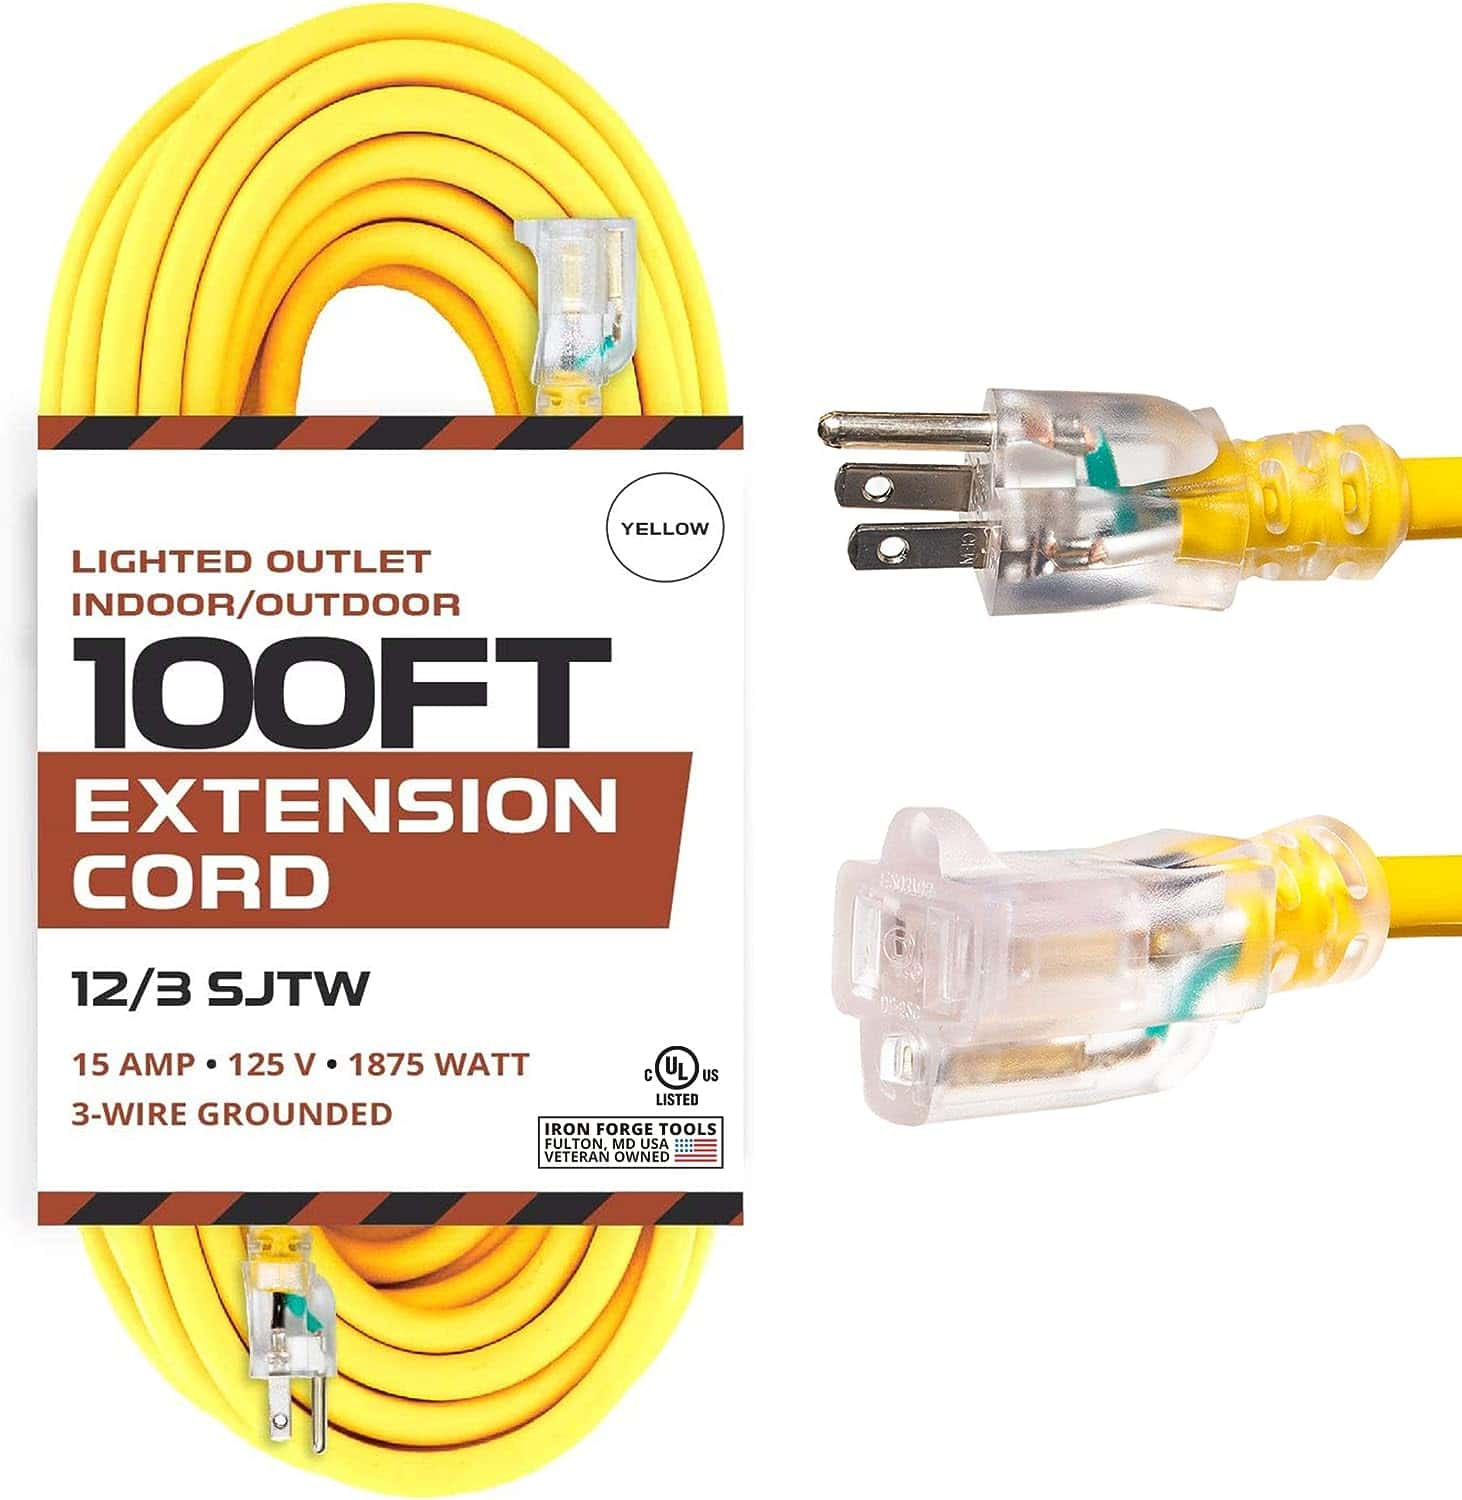 IRON FORGE CABLE 100 Foot Outdoor Extension Cord – 12 3 SJTW Heavy Duty Yellow 3 Prong Extension Cable, 15 AMP – Great for Garden and Major Appliances 1